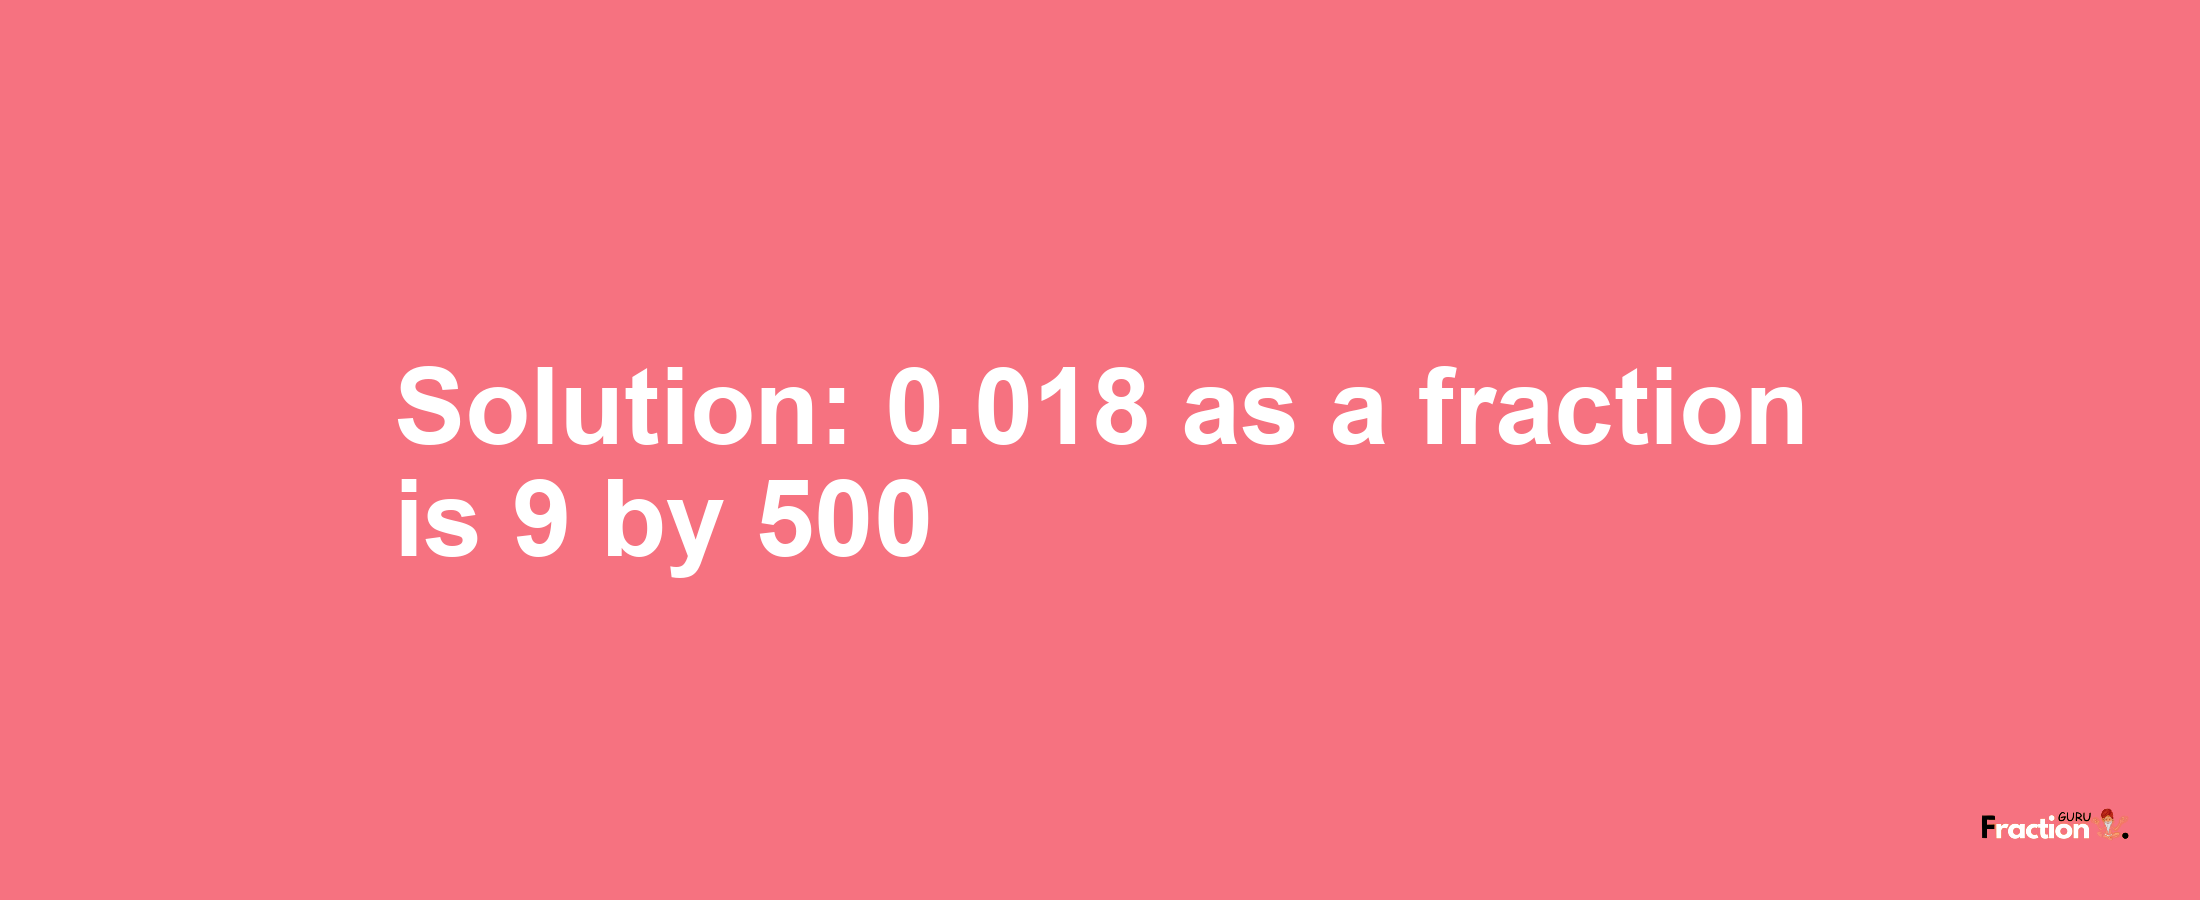 Solution:0.018 as a fraction is 9/500